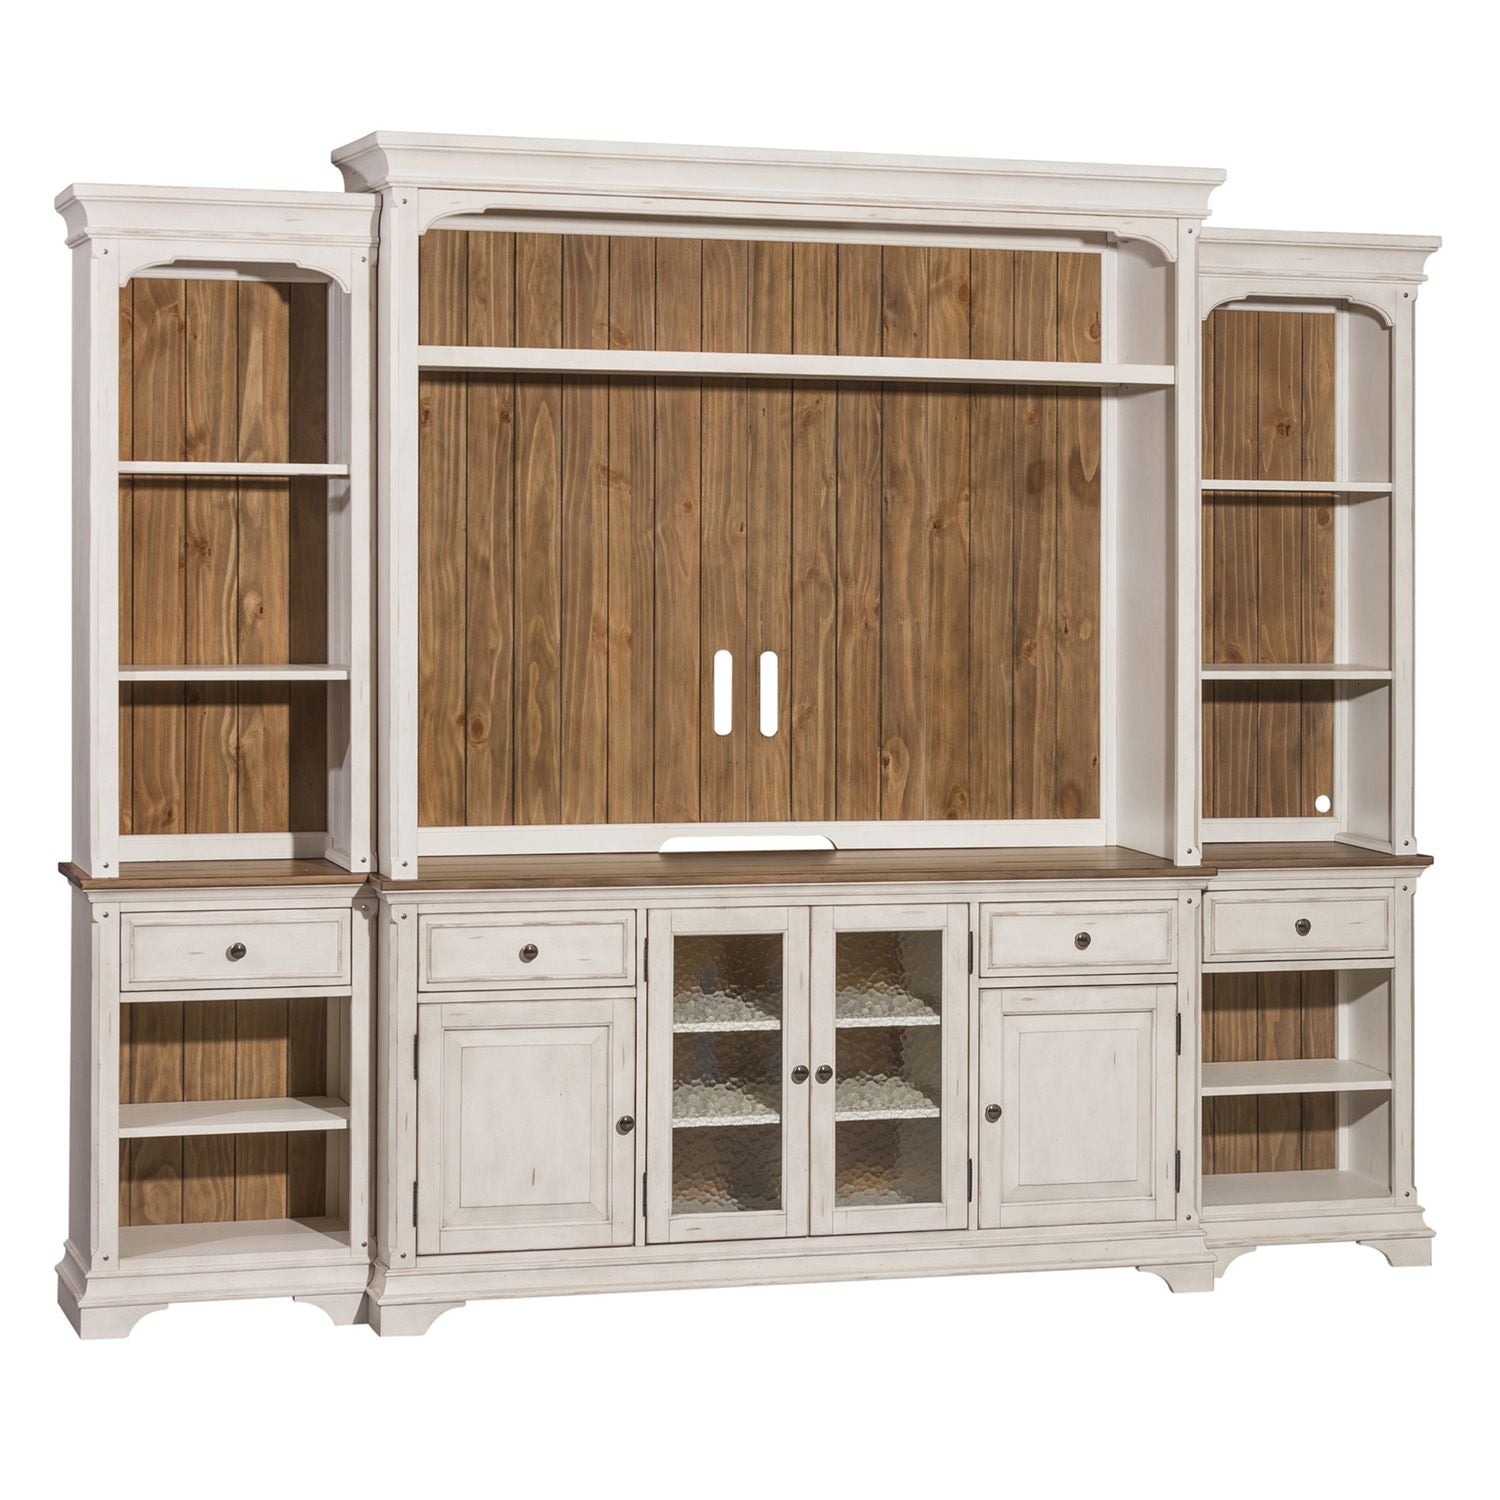 Morgan Creek / Entertainment Center with Piers SKU: 498-ENTW-ECP by Liberty Furniture